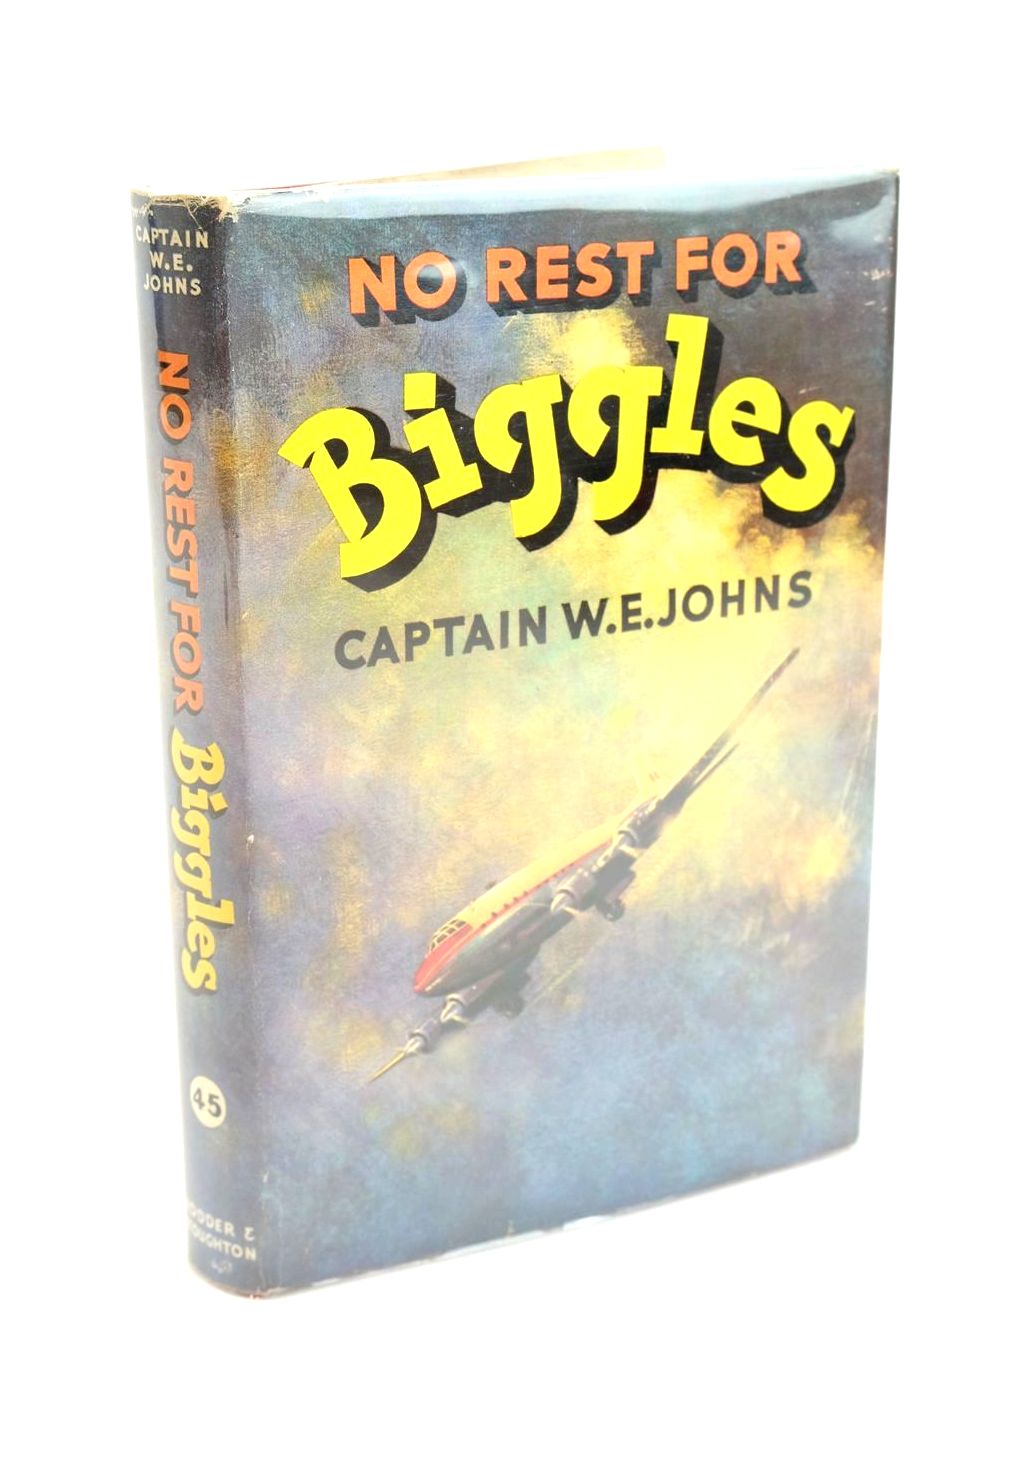 Photo of NO REST FOR BIGGLES written by Johns, W.E. illustrated by Stead,  published by Hodder &amp; Stoughton (STOCK CODE: 1323439)  for sale by Stella & Rose's Books